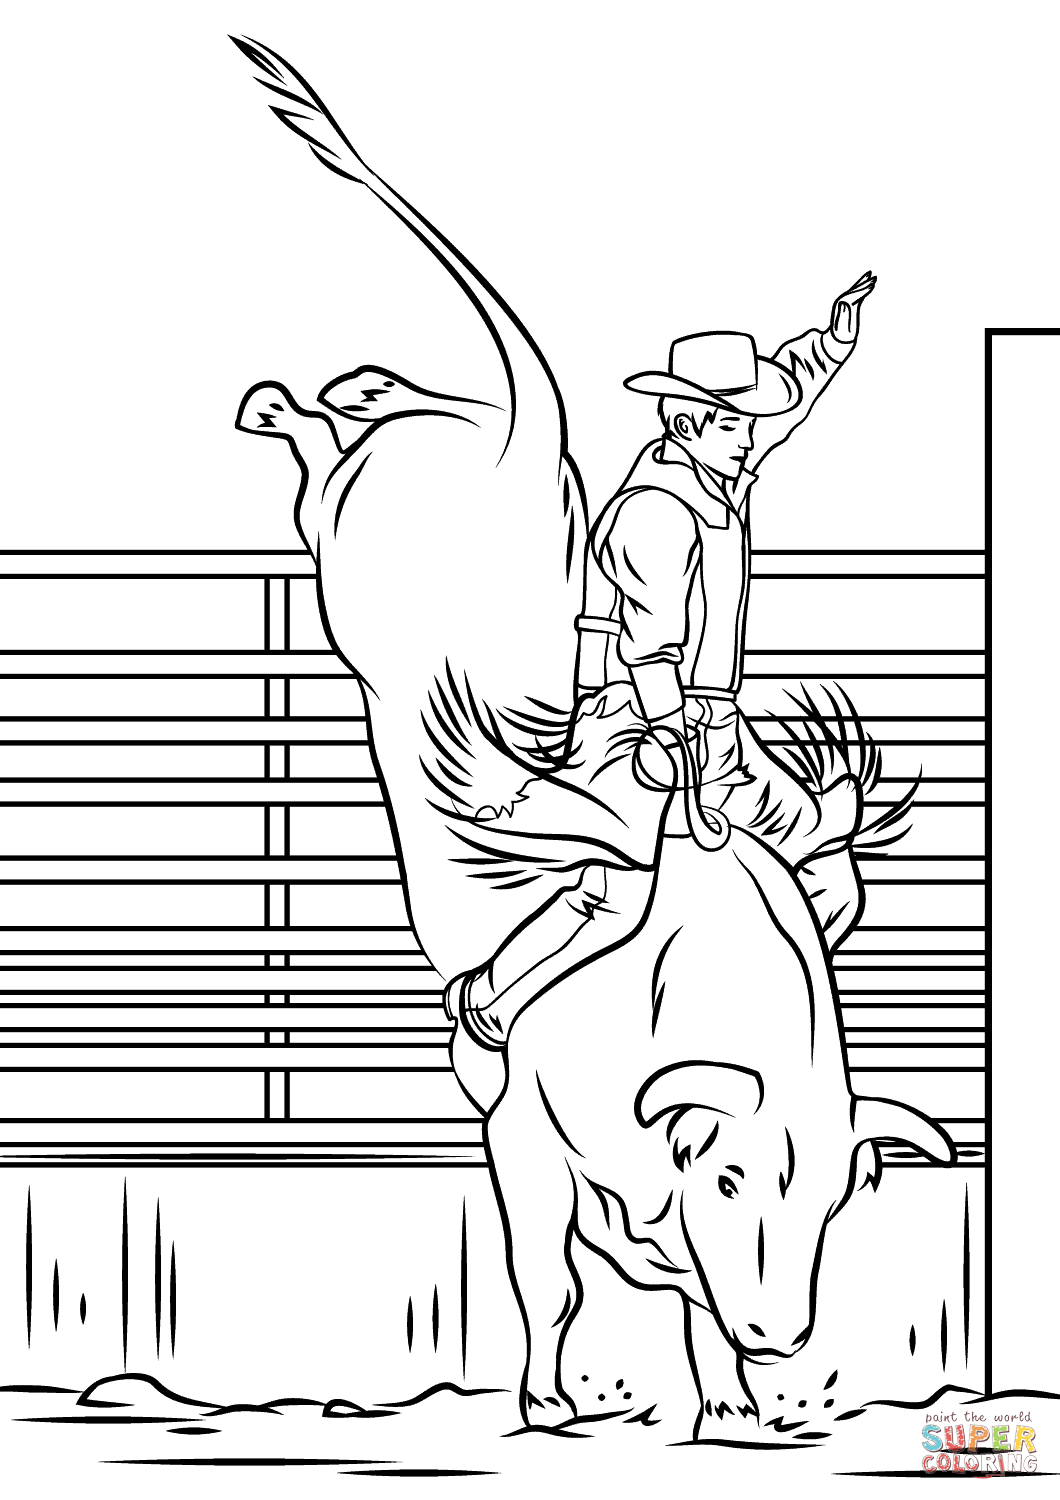 bull clipart coloring page